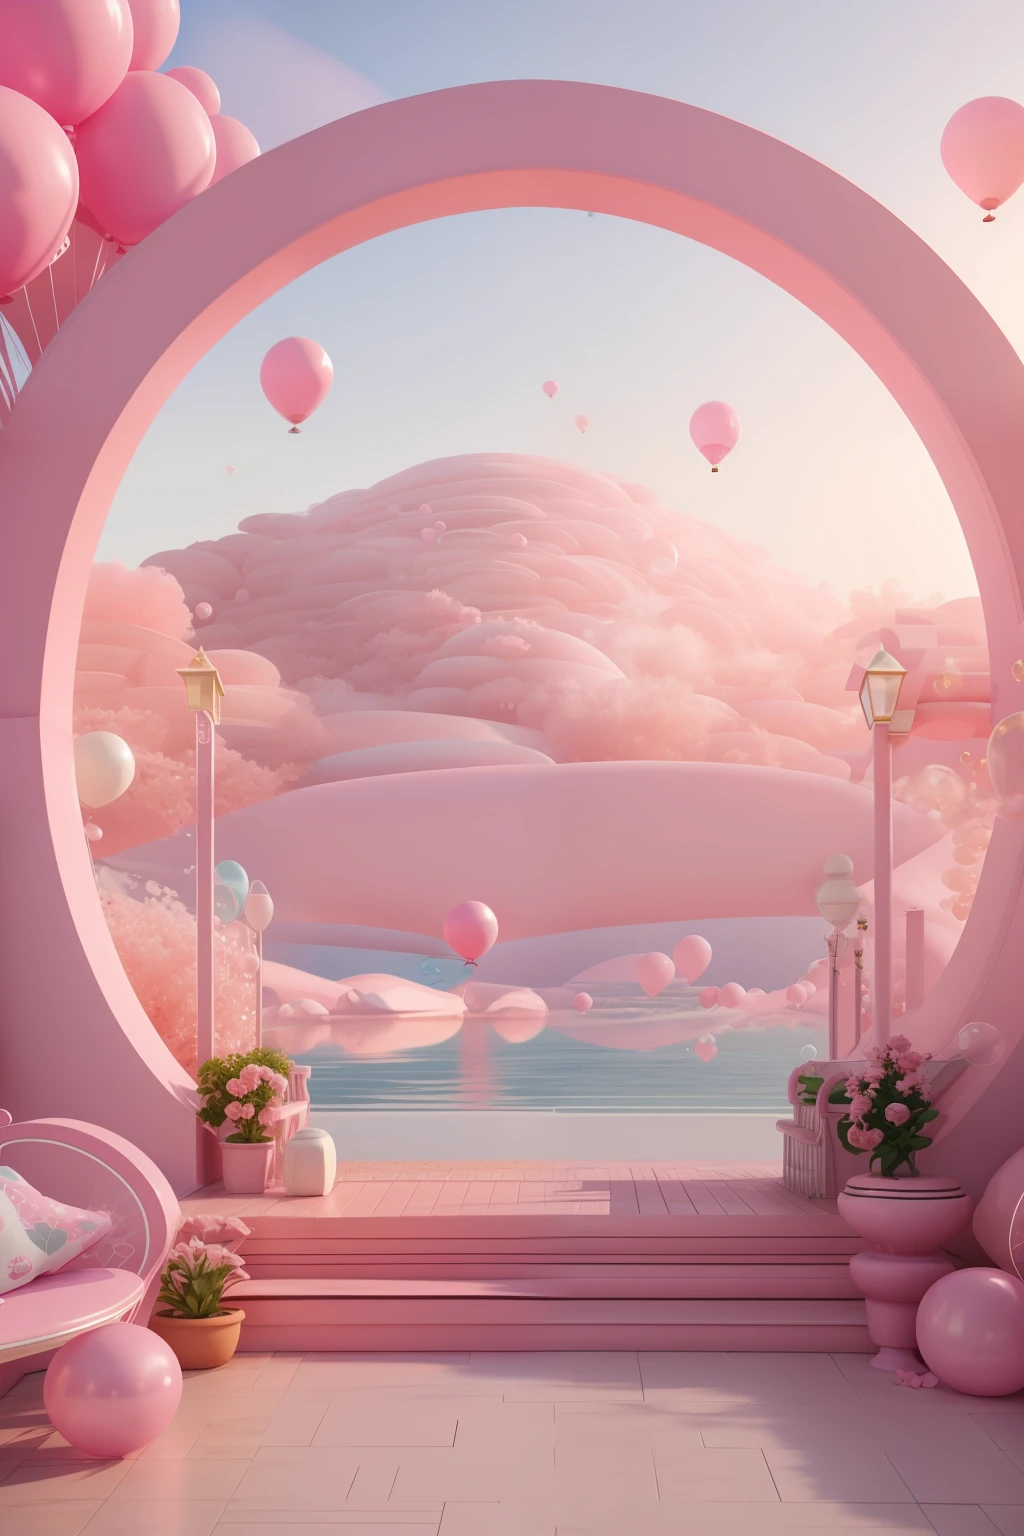 There is a pink and white arch，With balloons and benches, pink zen style, pink landscape, dreamy scenes, looking out at a pink ocean, 3 d render stylized, stylized 3d render, surreal 3 d render, bubbly scenery, surreal dream landscape, 3 d stylize scene, stylized as a 3d render, dreamy atmosphere and drama